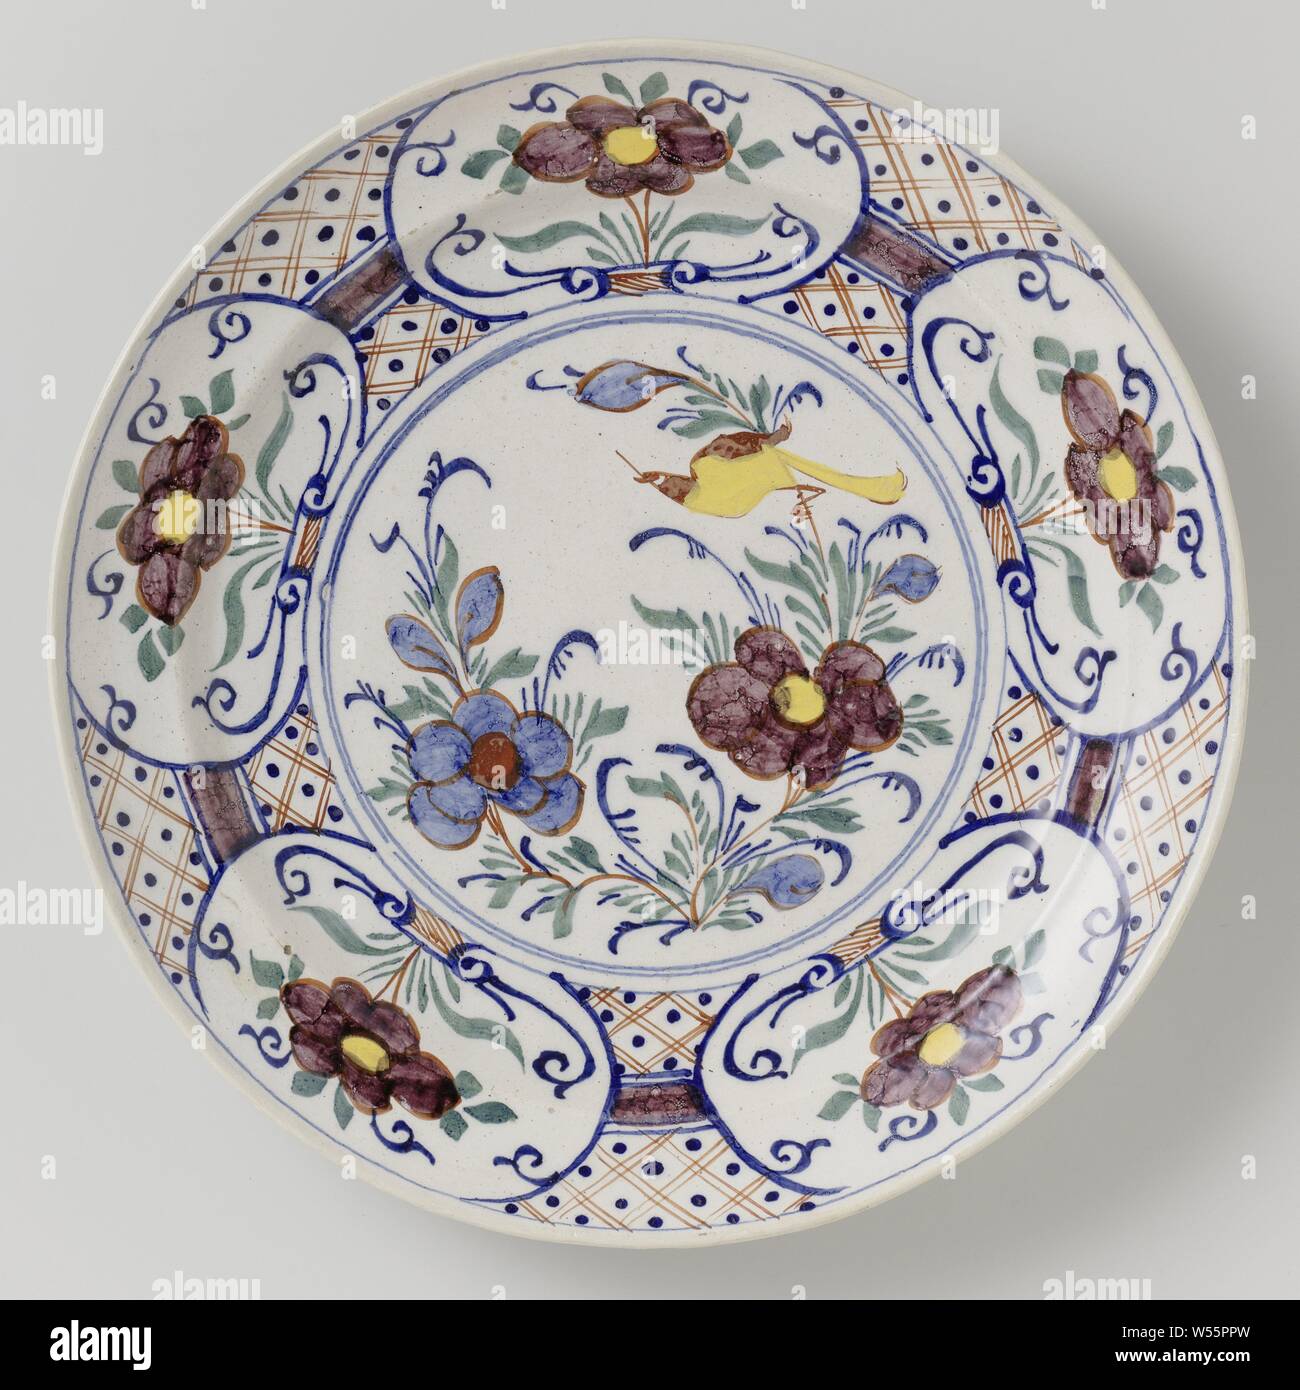 Dish, Round dish of multi-colored faience, with a circle on which a multi-colored bird and flowers are placed. A diamond pattern with dots is painted around the circle, in which five oval boxes with flowers in the colors yellow and manganese. The reverse side is marked with the number 5., anonymous, Delft, c. 1750 - c. 1780, earthenware, tin glaze, d 34.2 cm × h 5.4 cm Stock Photo